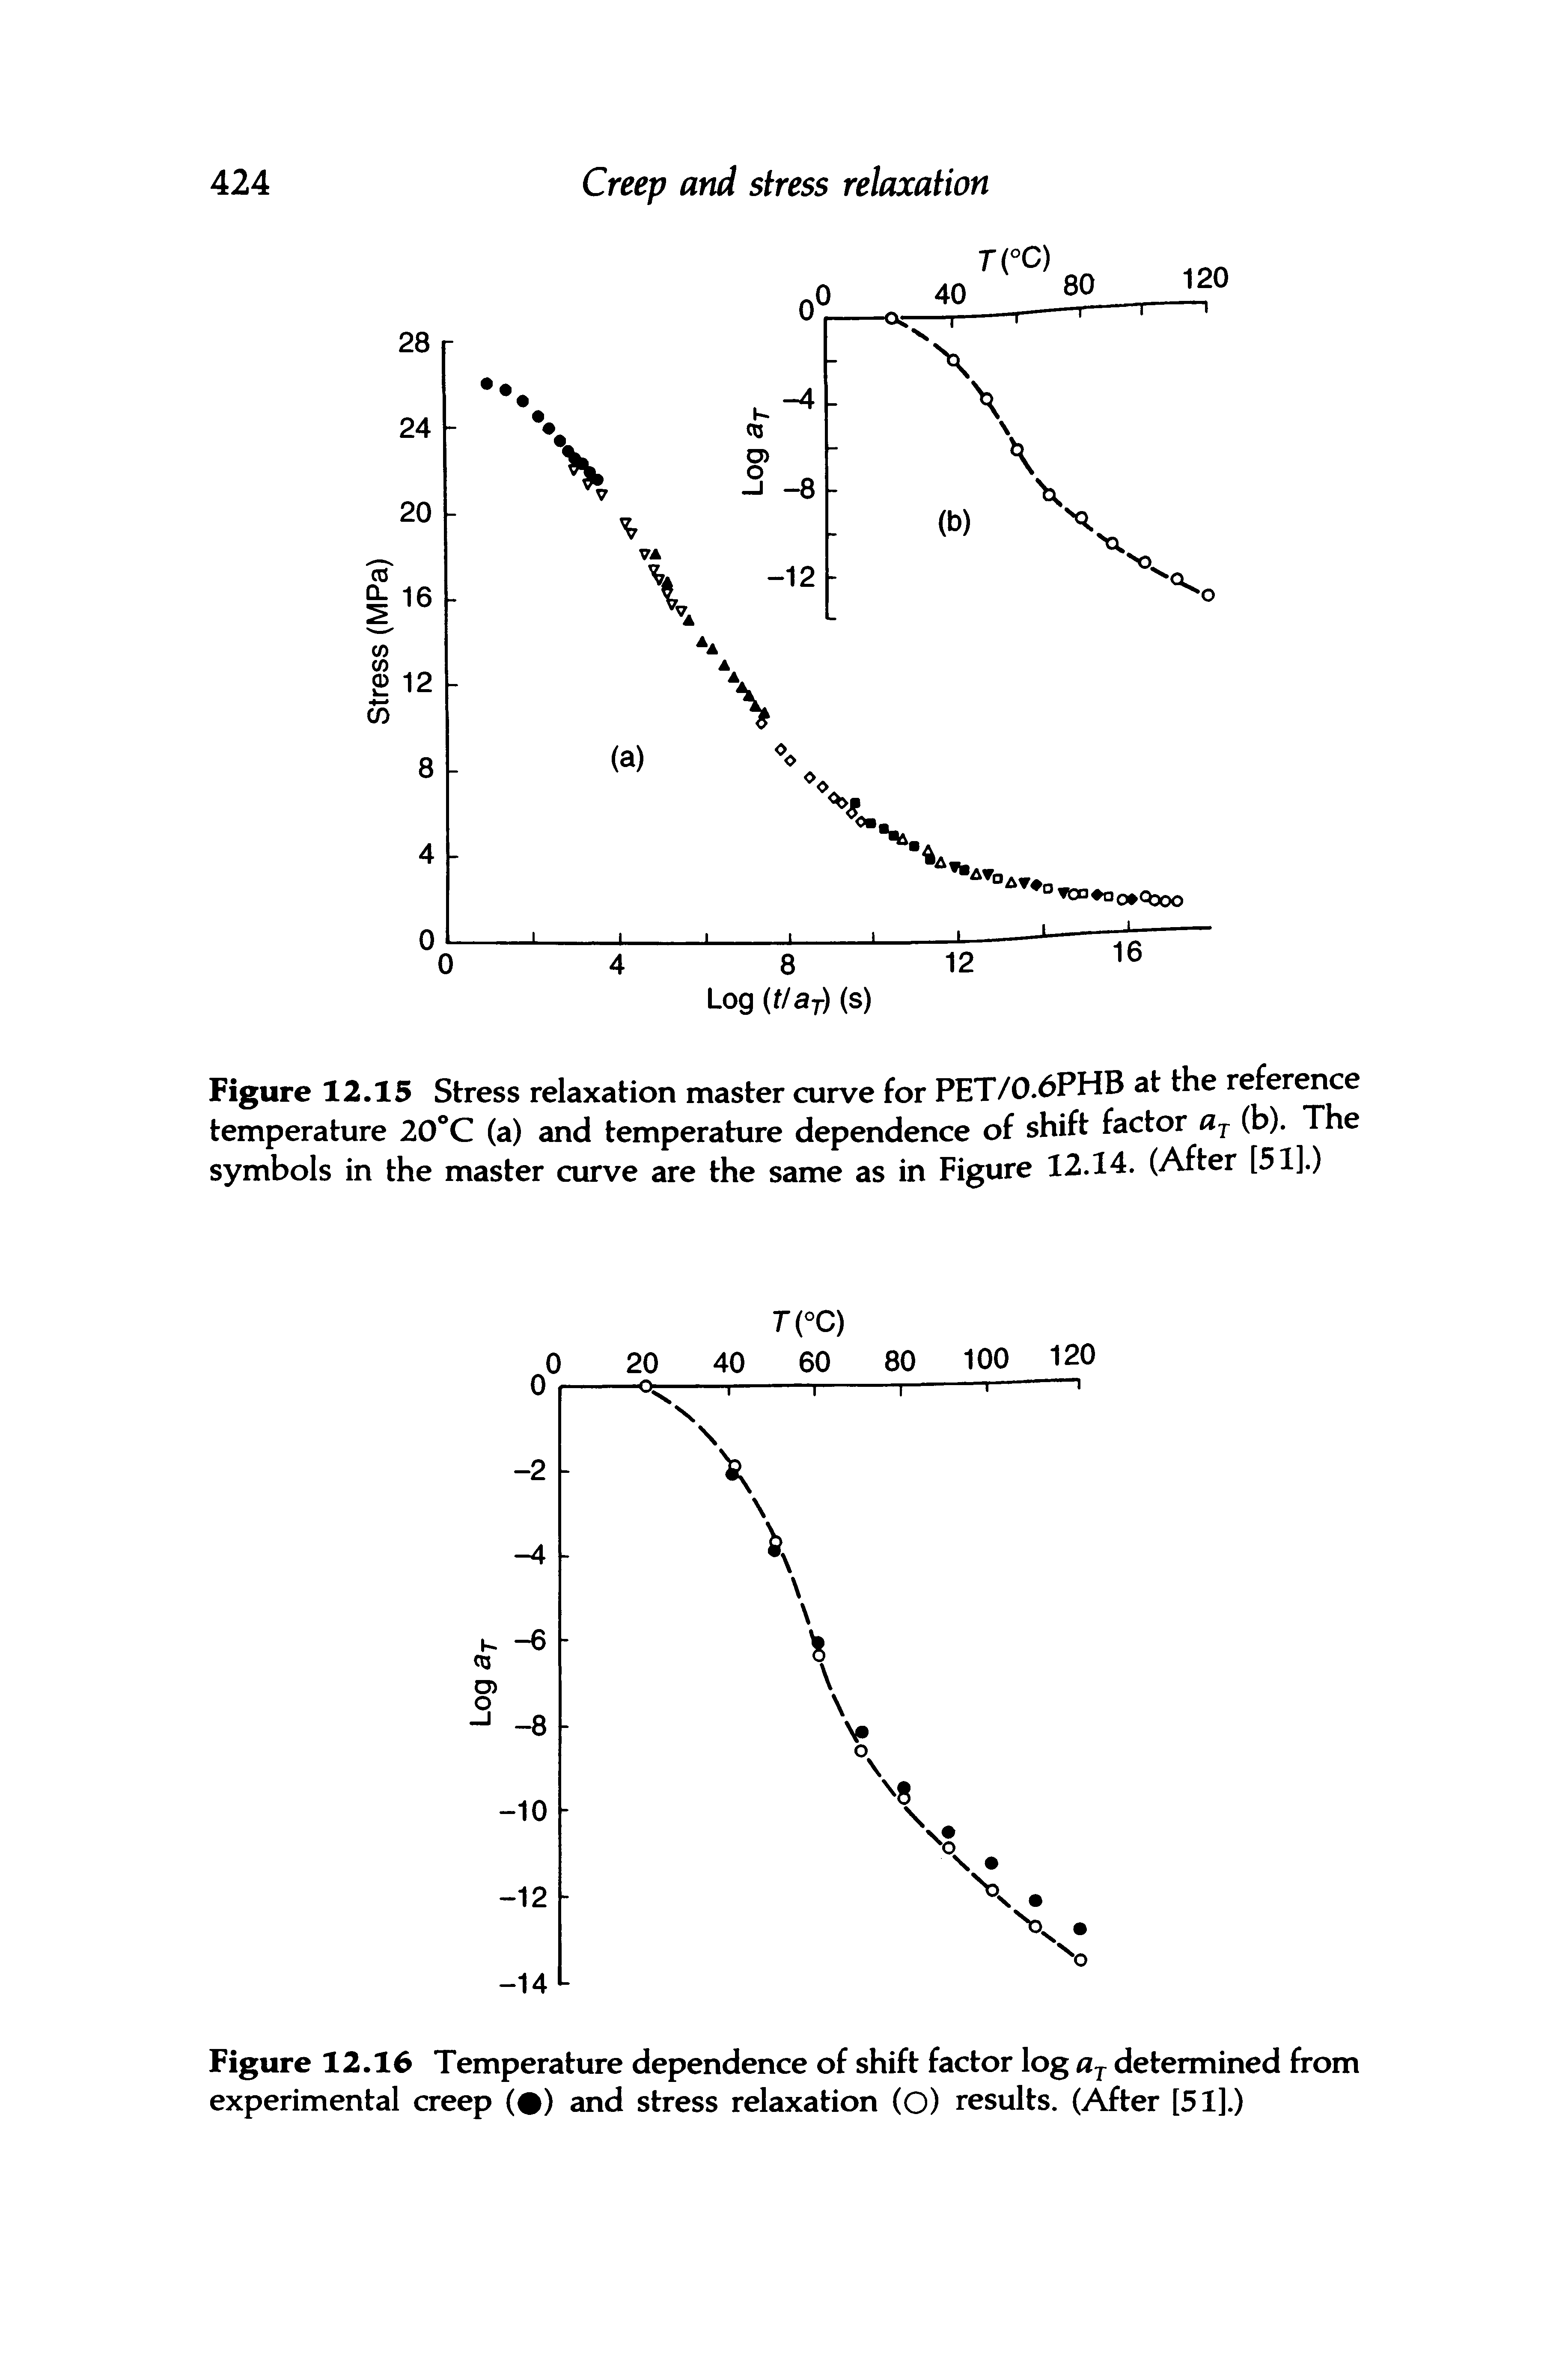 Figure 12.15 Stress relaxation master curve for PET/0.6PHB at the reference temperature 20 C (a) and temperature dependence of shift factor (b). The symbols in the master curve are the same as in Figure 12.14. (After [51].)...